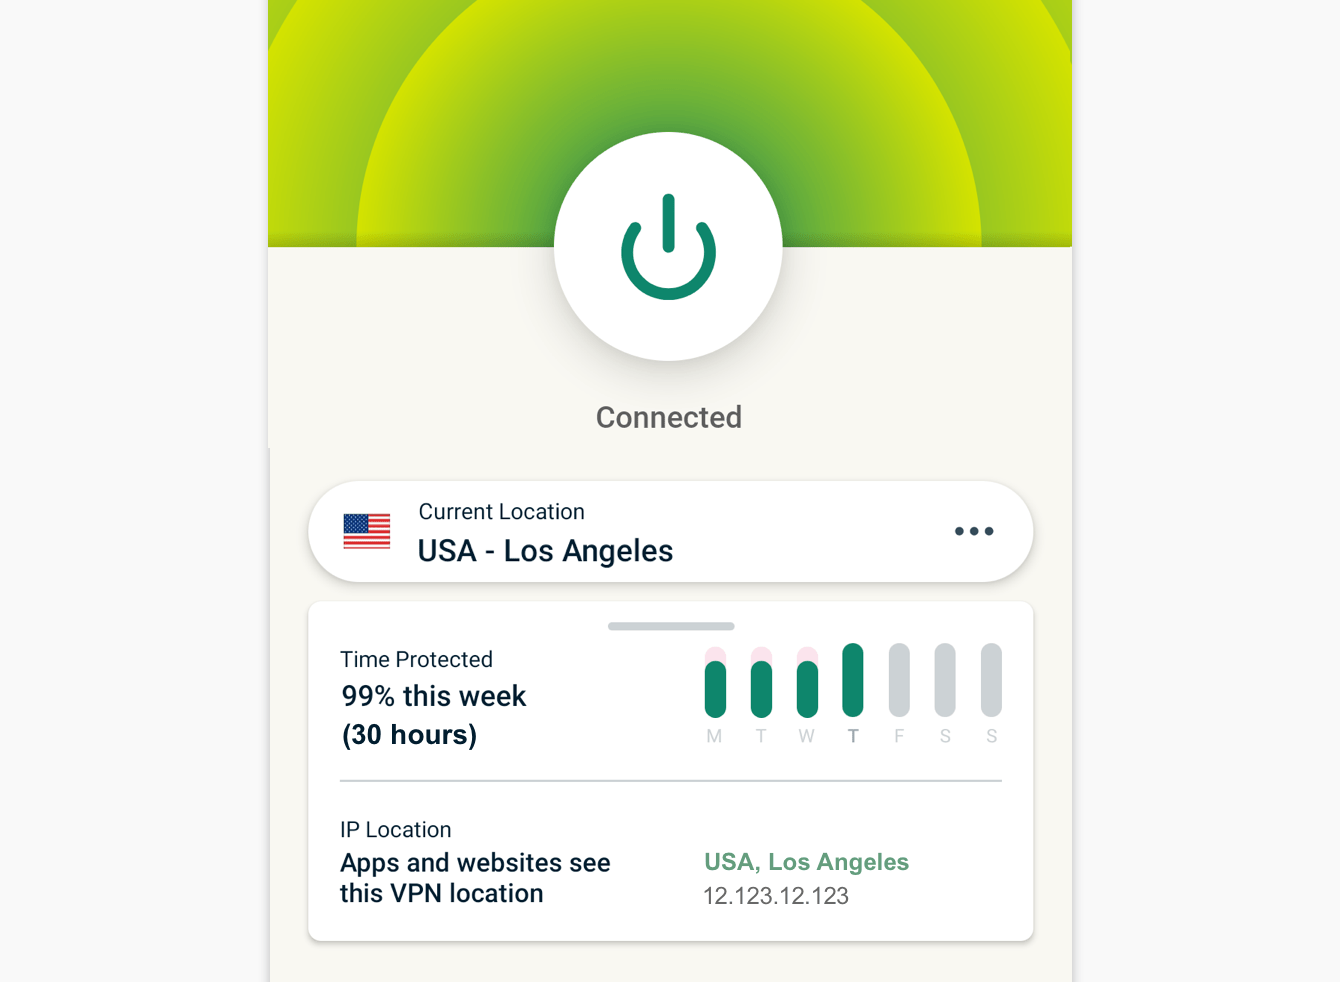 Protection Summary shows a weekly overview of how long you were connected to the VPN. 